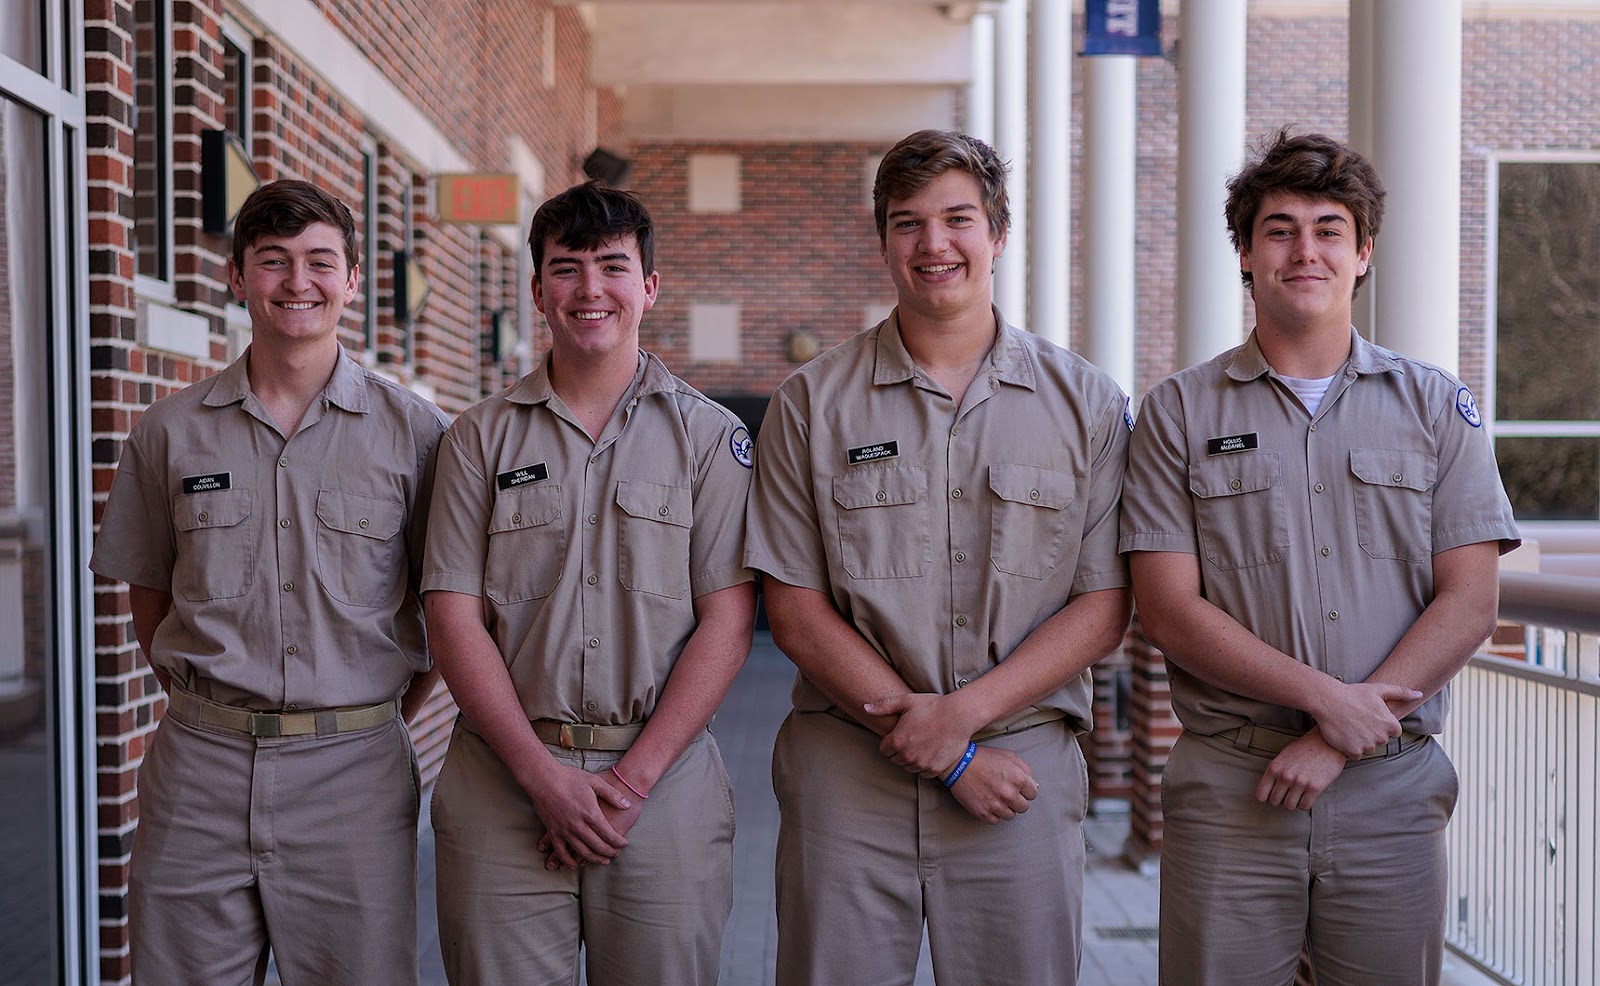 Student Body Elects Four Members of 2023 Student Council Executive Board |  Jesuit High School of New Orleans